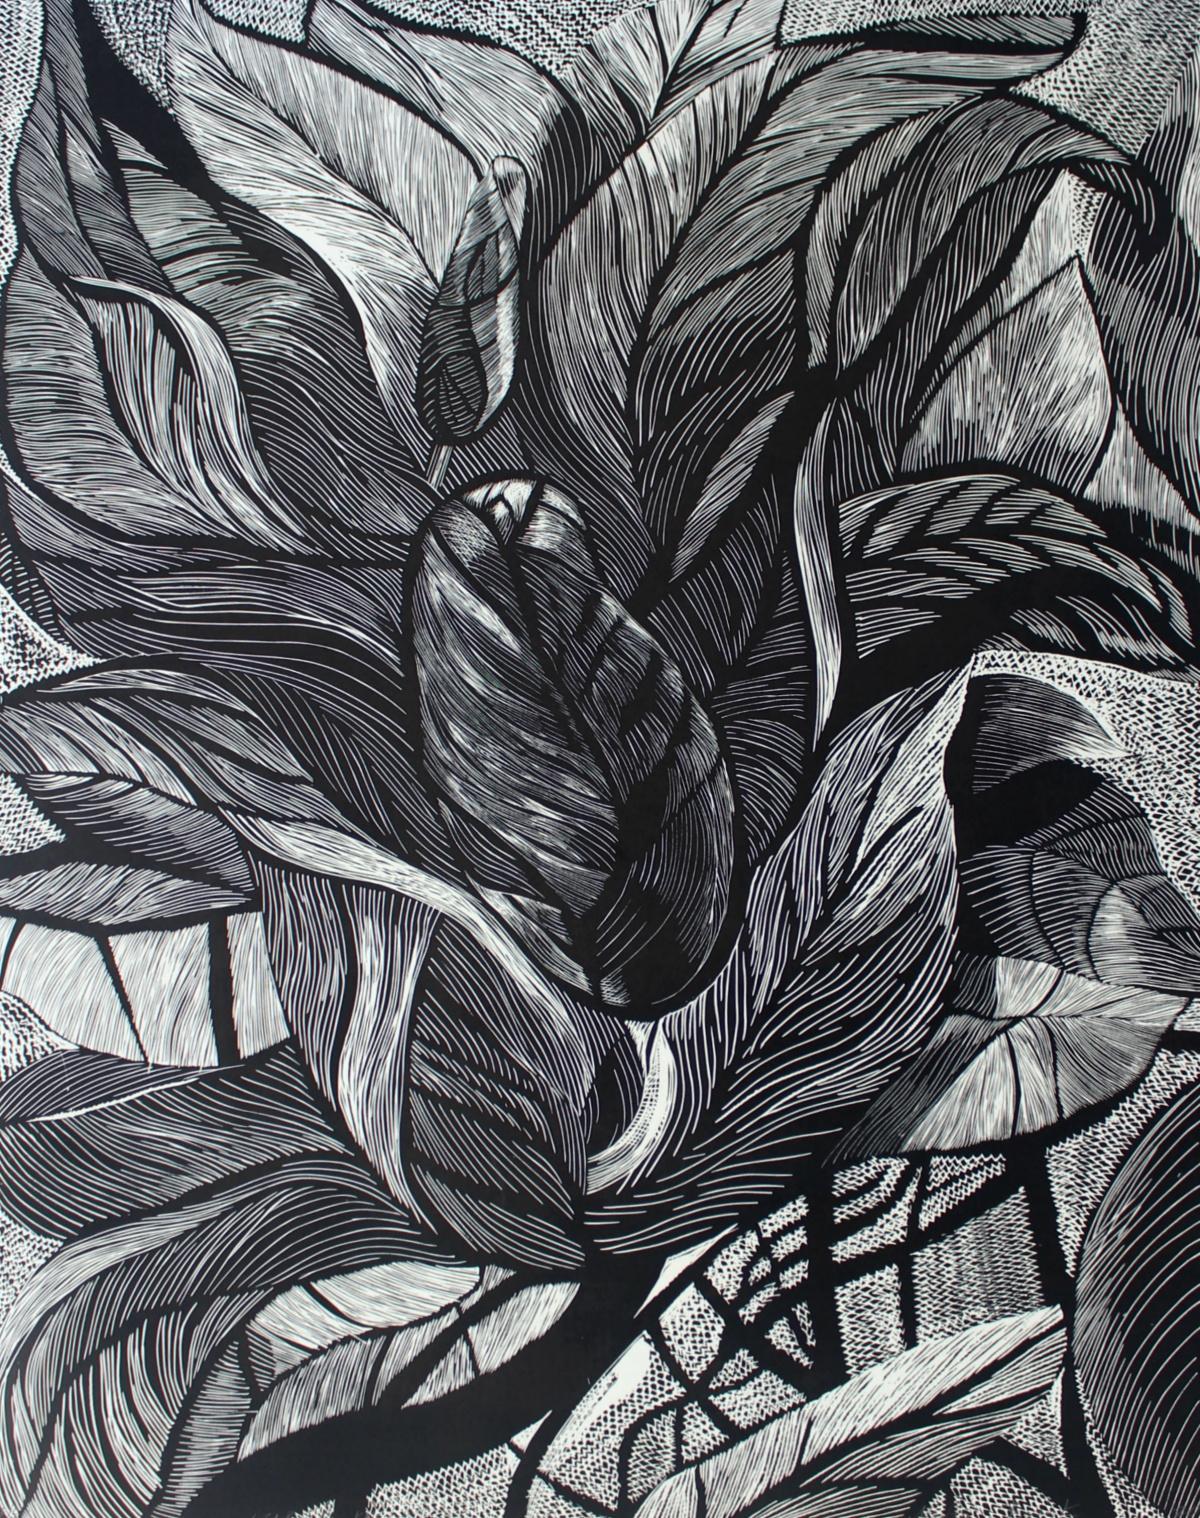 Black flower - XXI Century, Contemporary Floral Linocut, Black and White